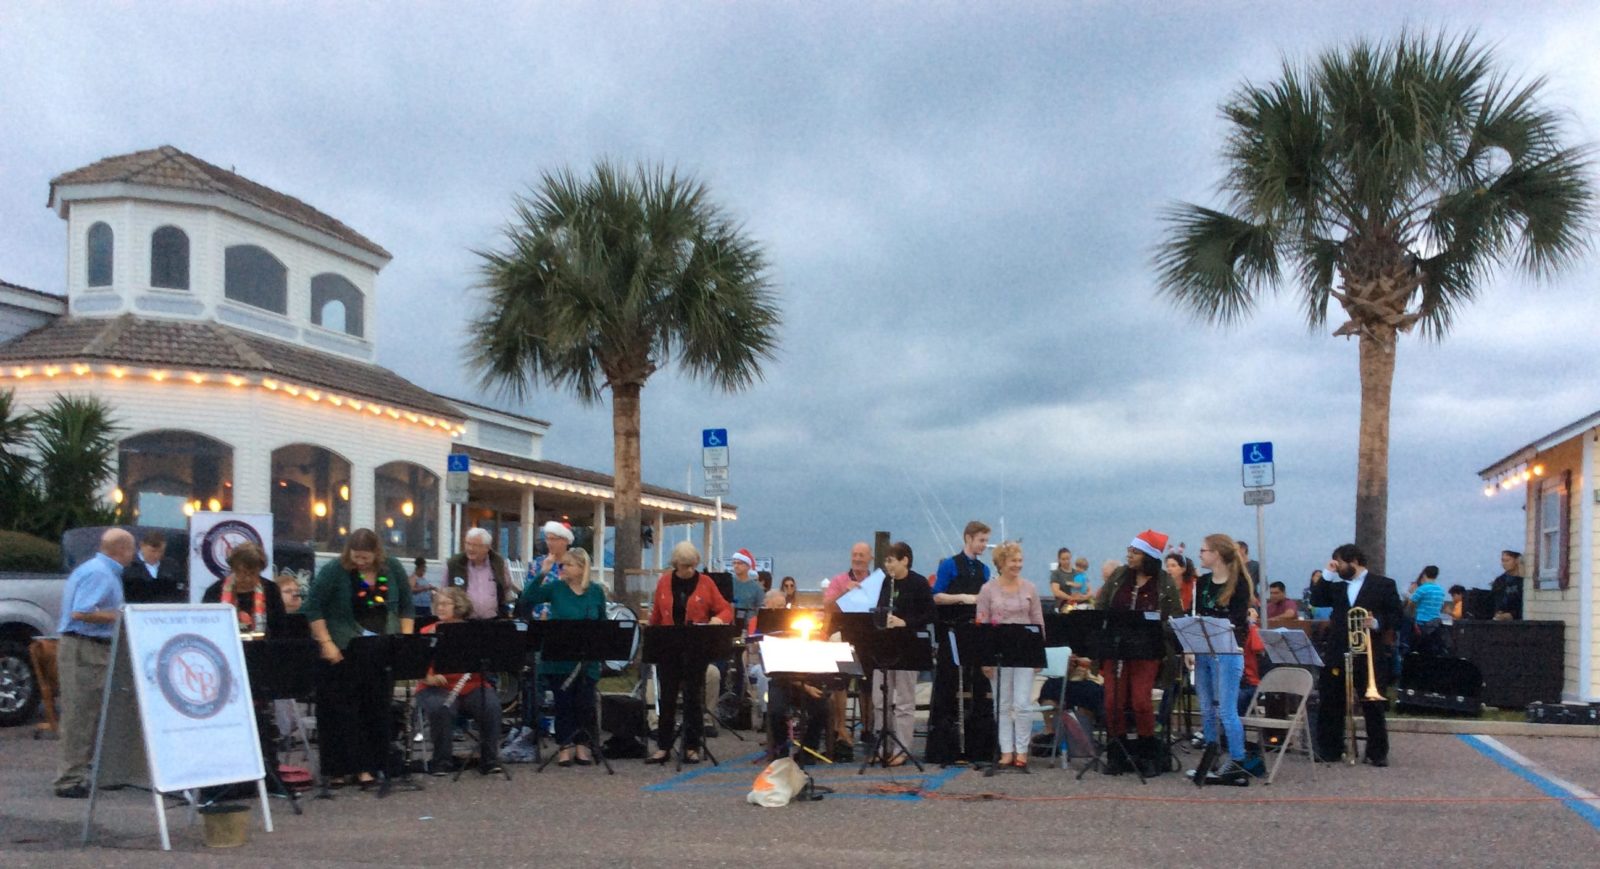 Nassau Community Band schedules concerts for holiday season